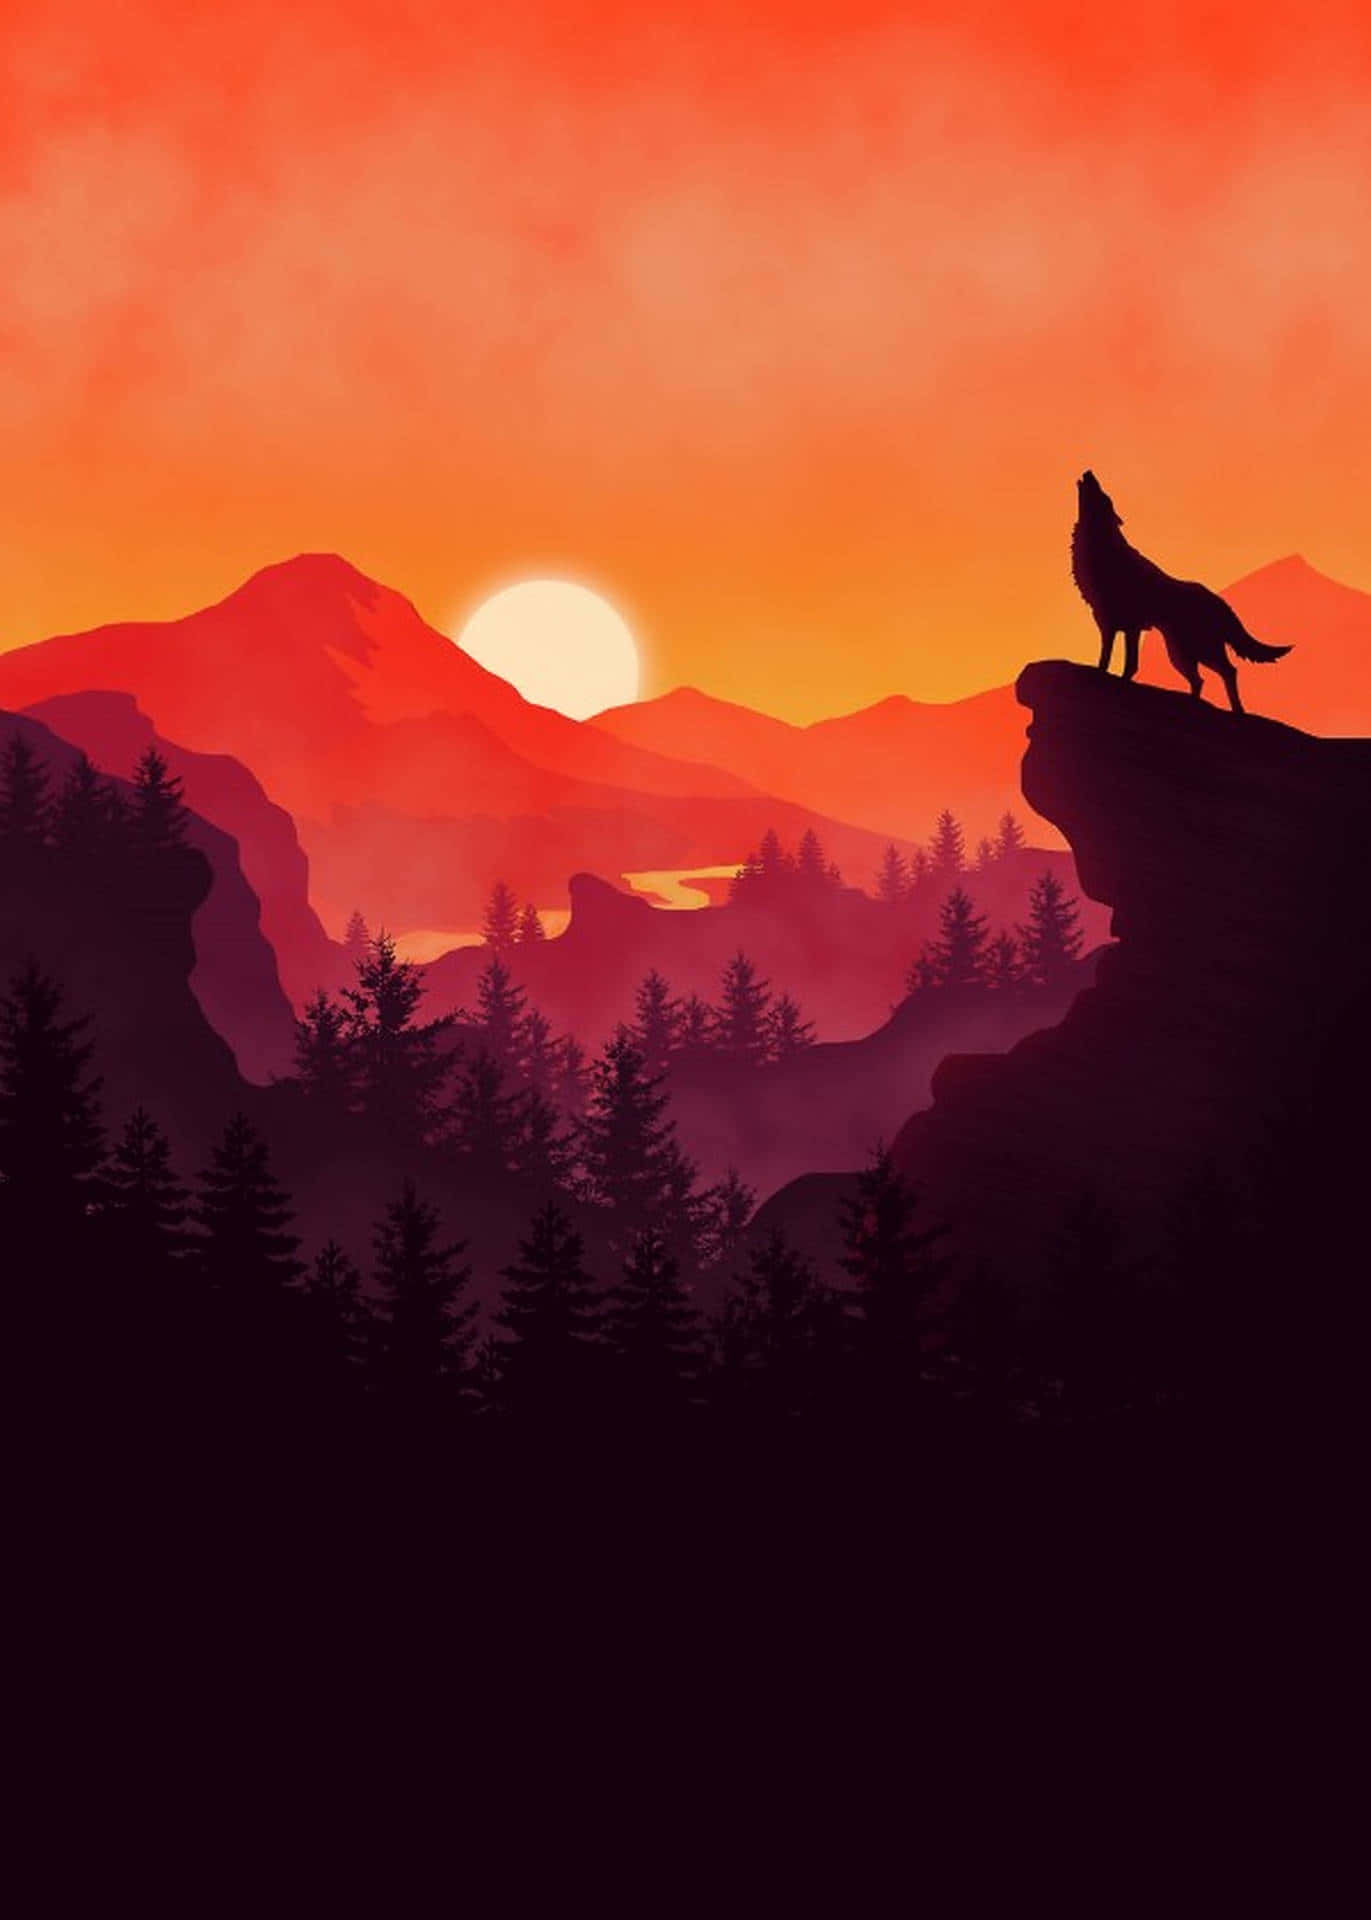 A majestic wolf gazing into the sunset Wallpaper